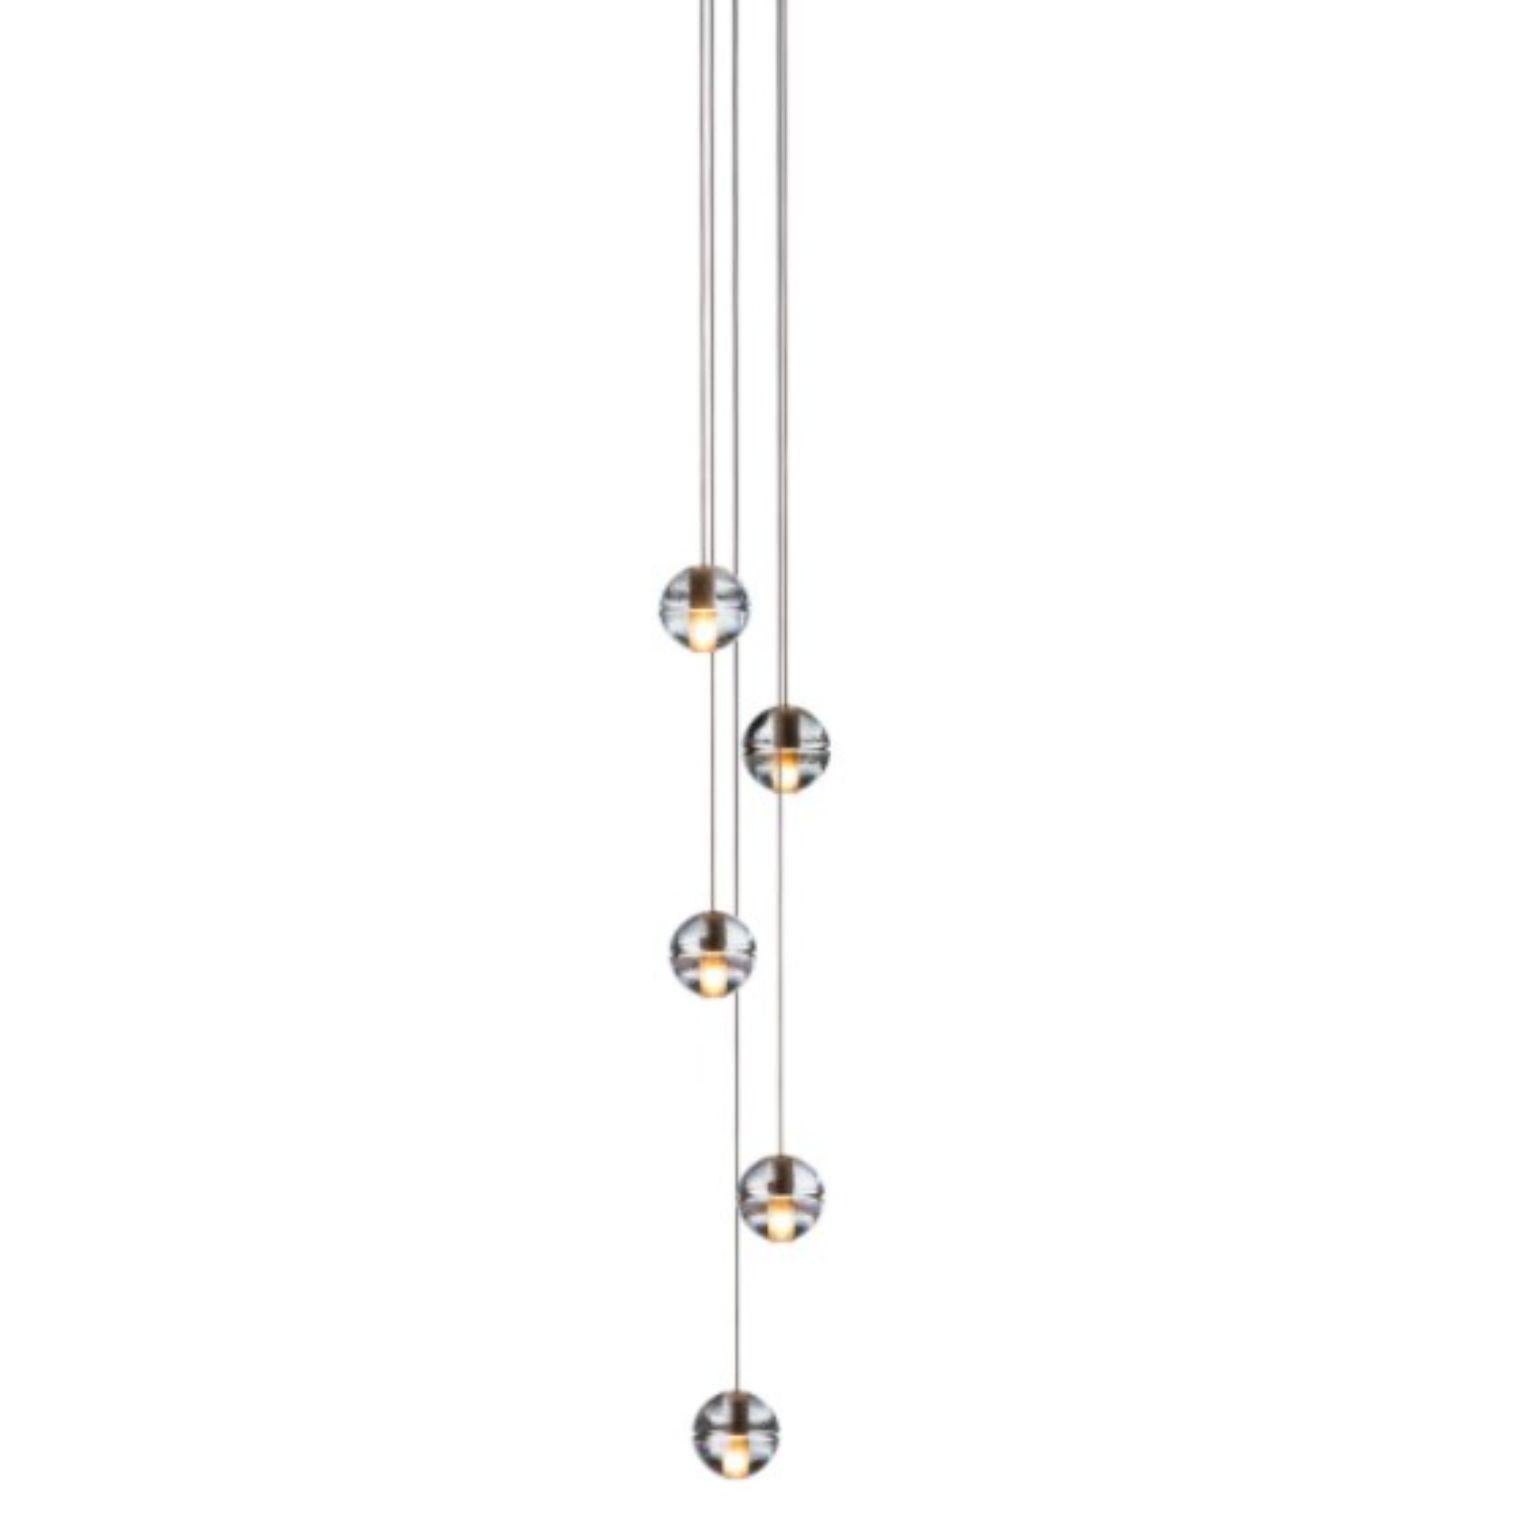 14.5 Single Pendant by Bocci
Dimensions: D15.2 x H300 cm
Materials: Brushed nickel
Weight: 9.5 kg
Adjustable lengths, Other materials and dimensions can be ordered.

All our lamps can be wired according to each country. If sold to the USA it